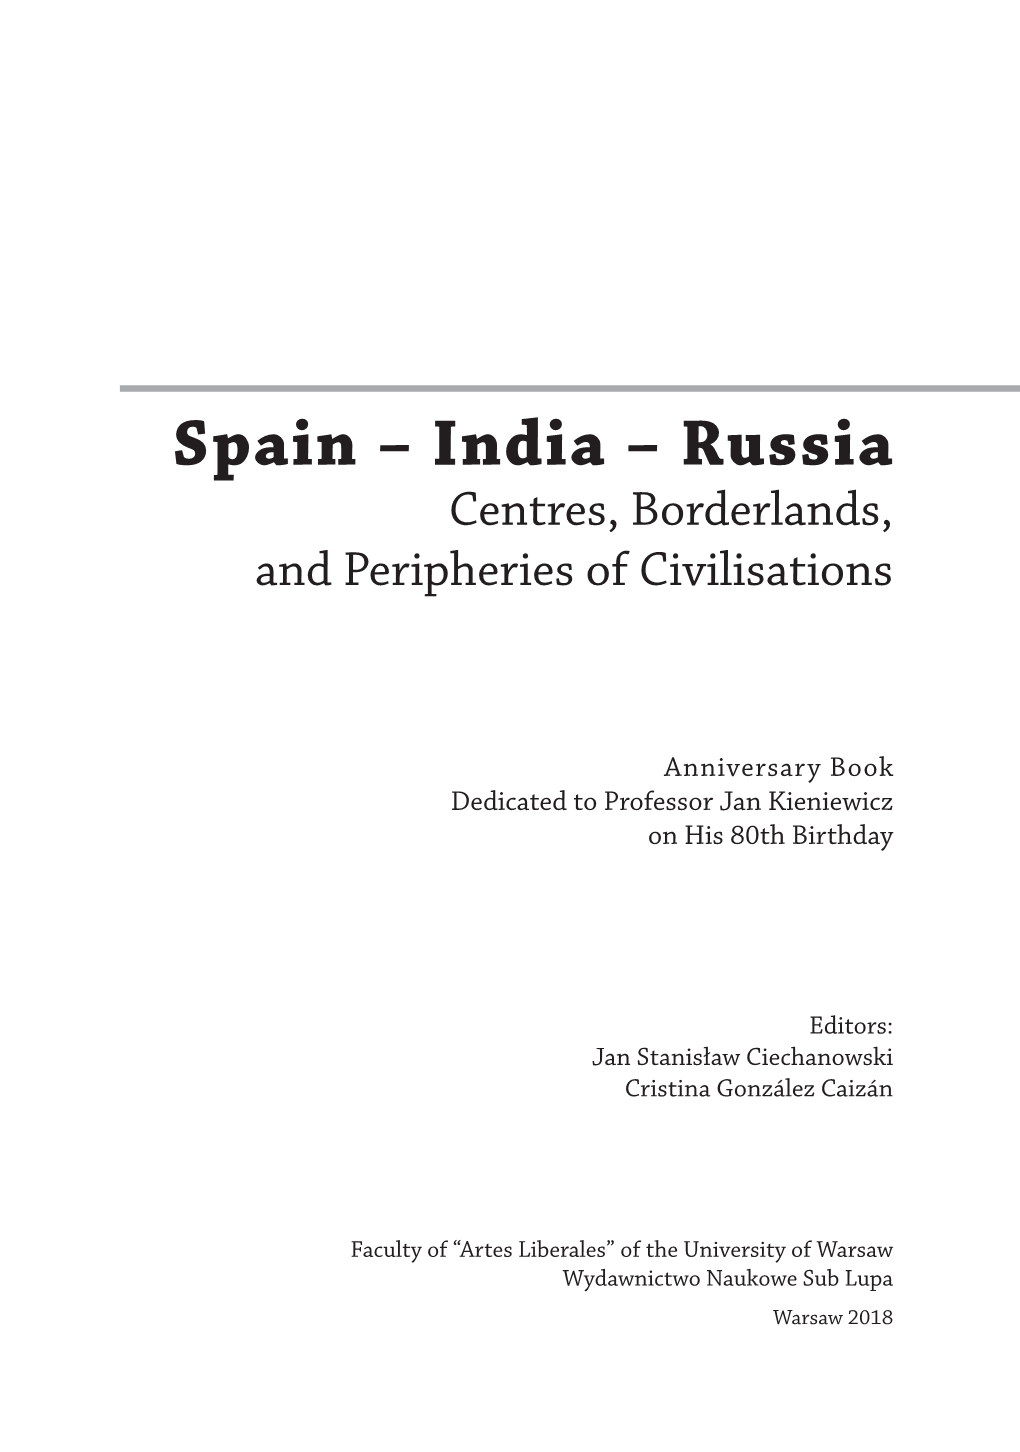 India – Russia Centres, Borderlands, and Peripheries of Civilisations